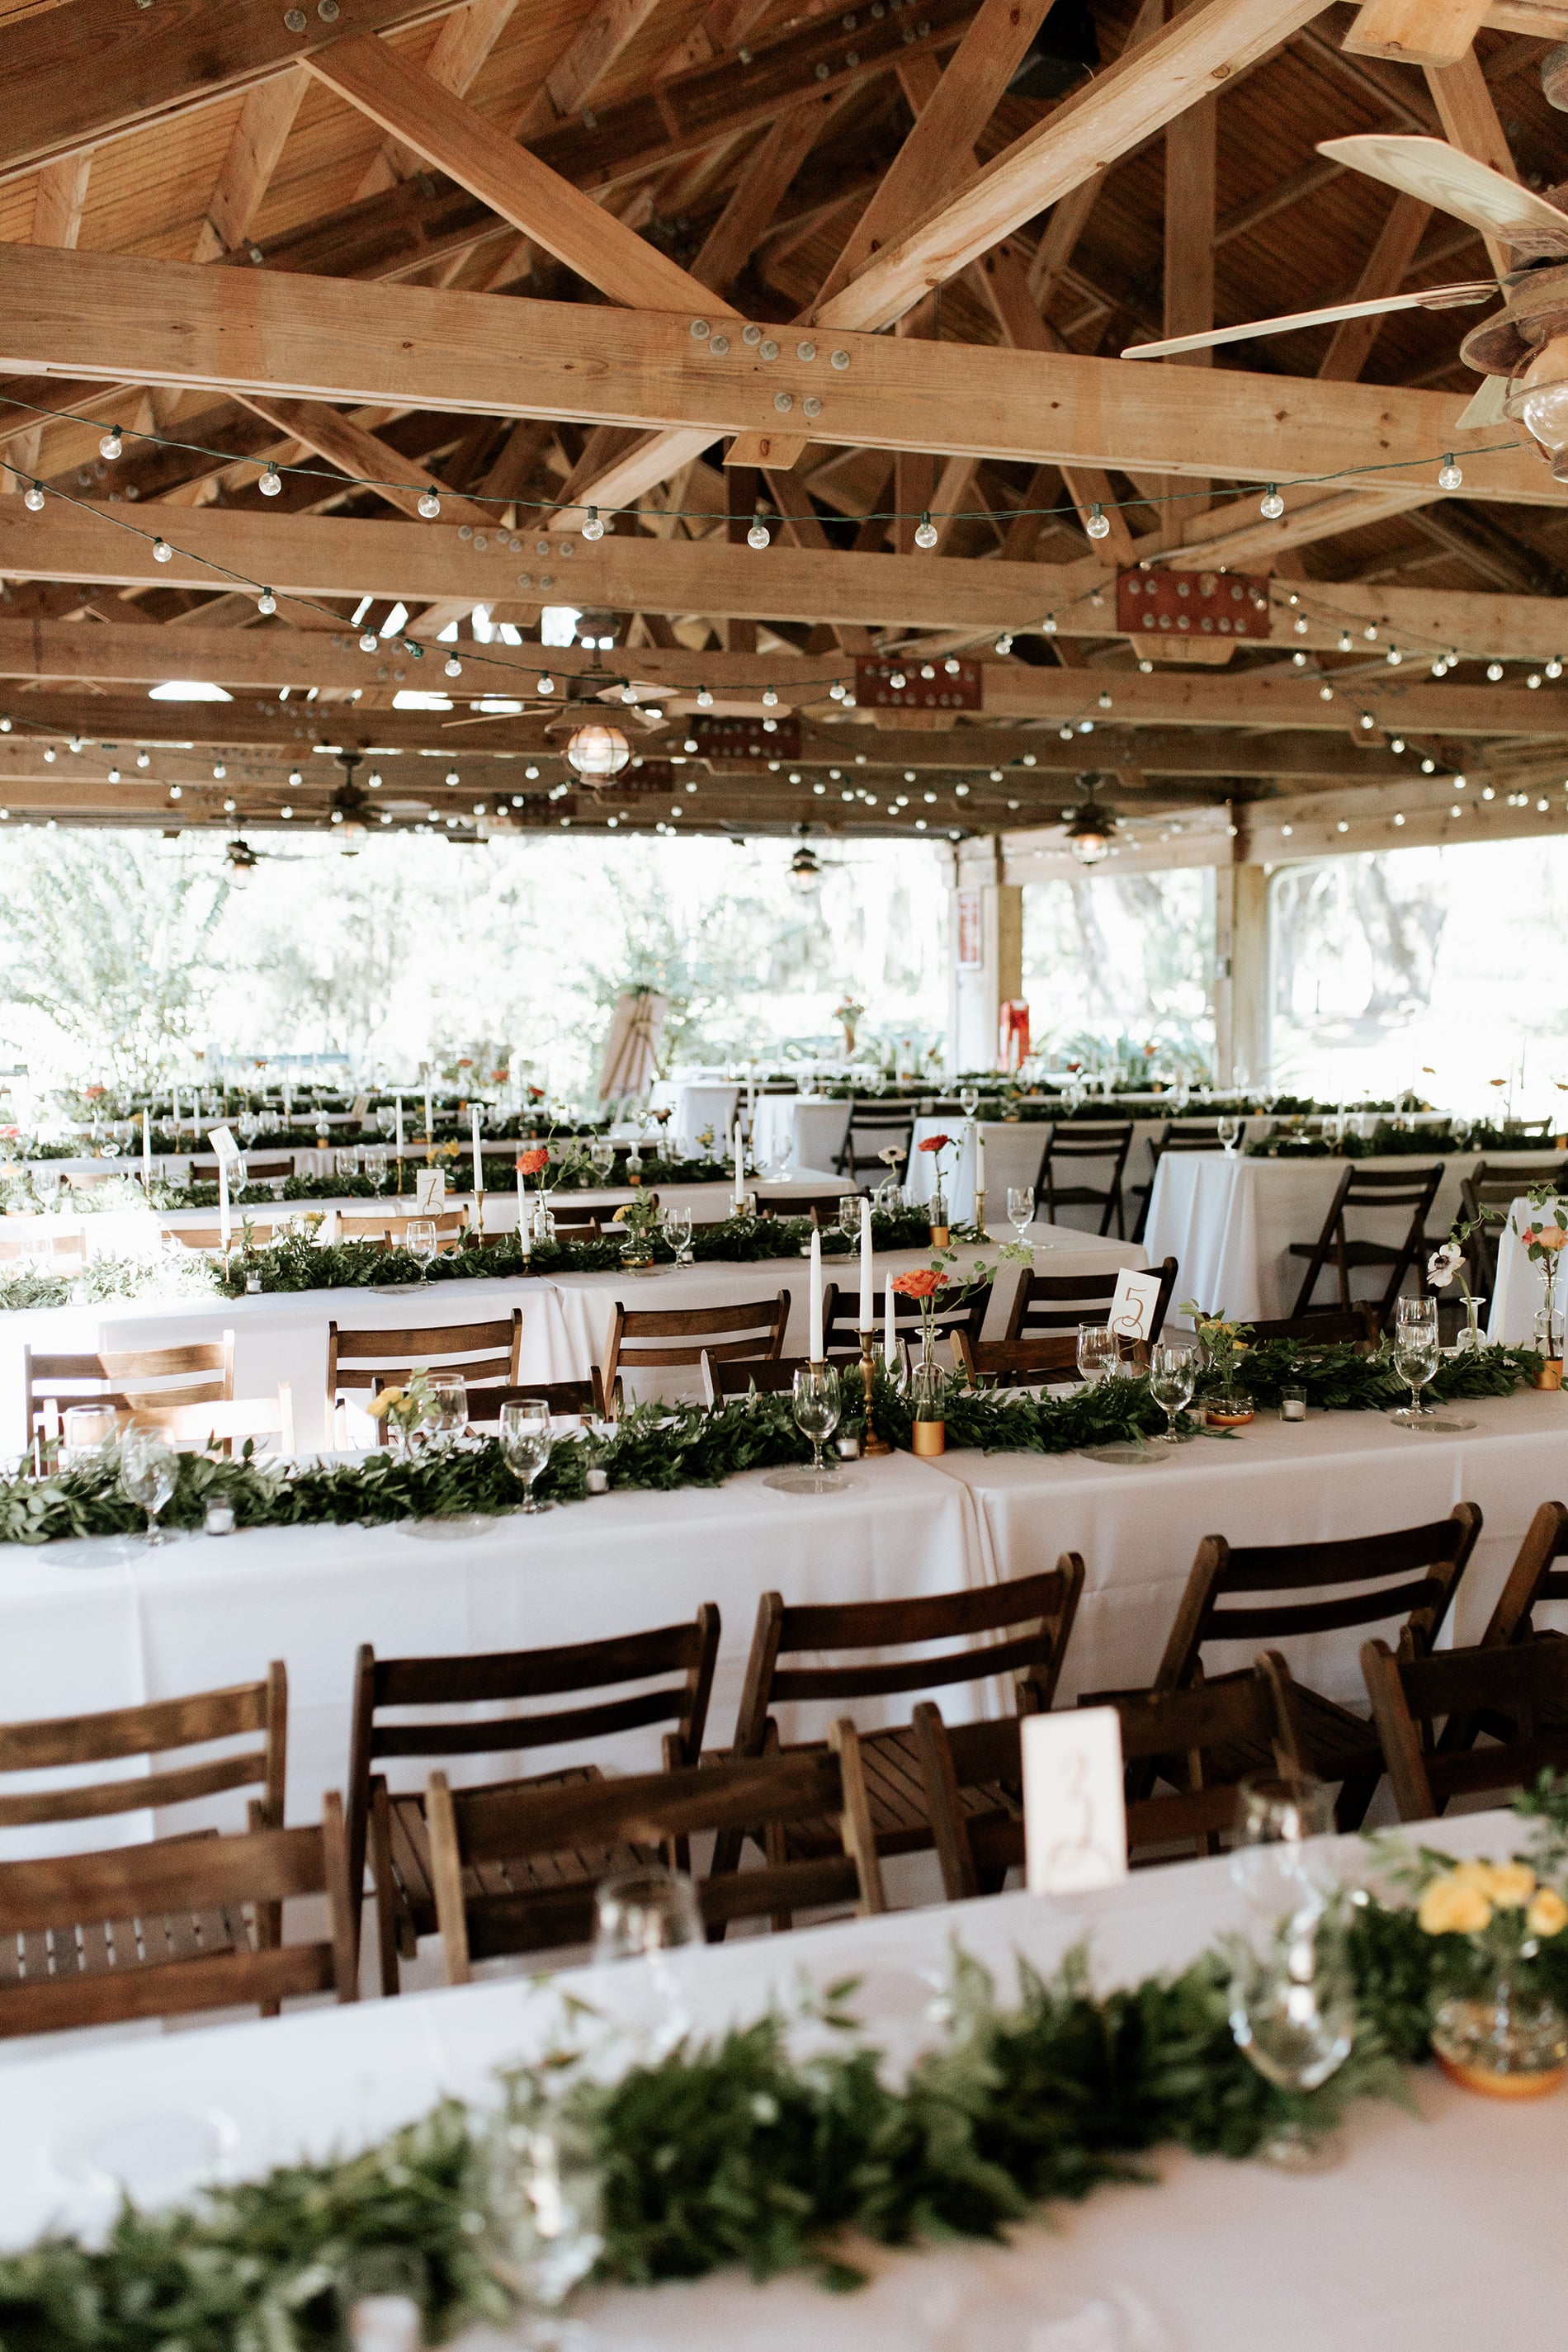 lowcountry-kitchen-catering-beaufort-sc-mary-grace-and-judd-kennedy-wedding-ceremony-bingo-tables-min.jpg